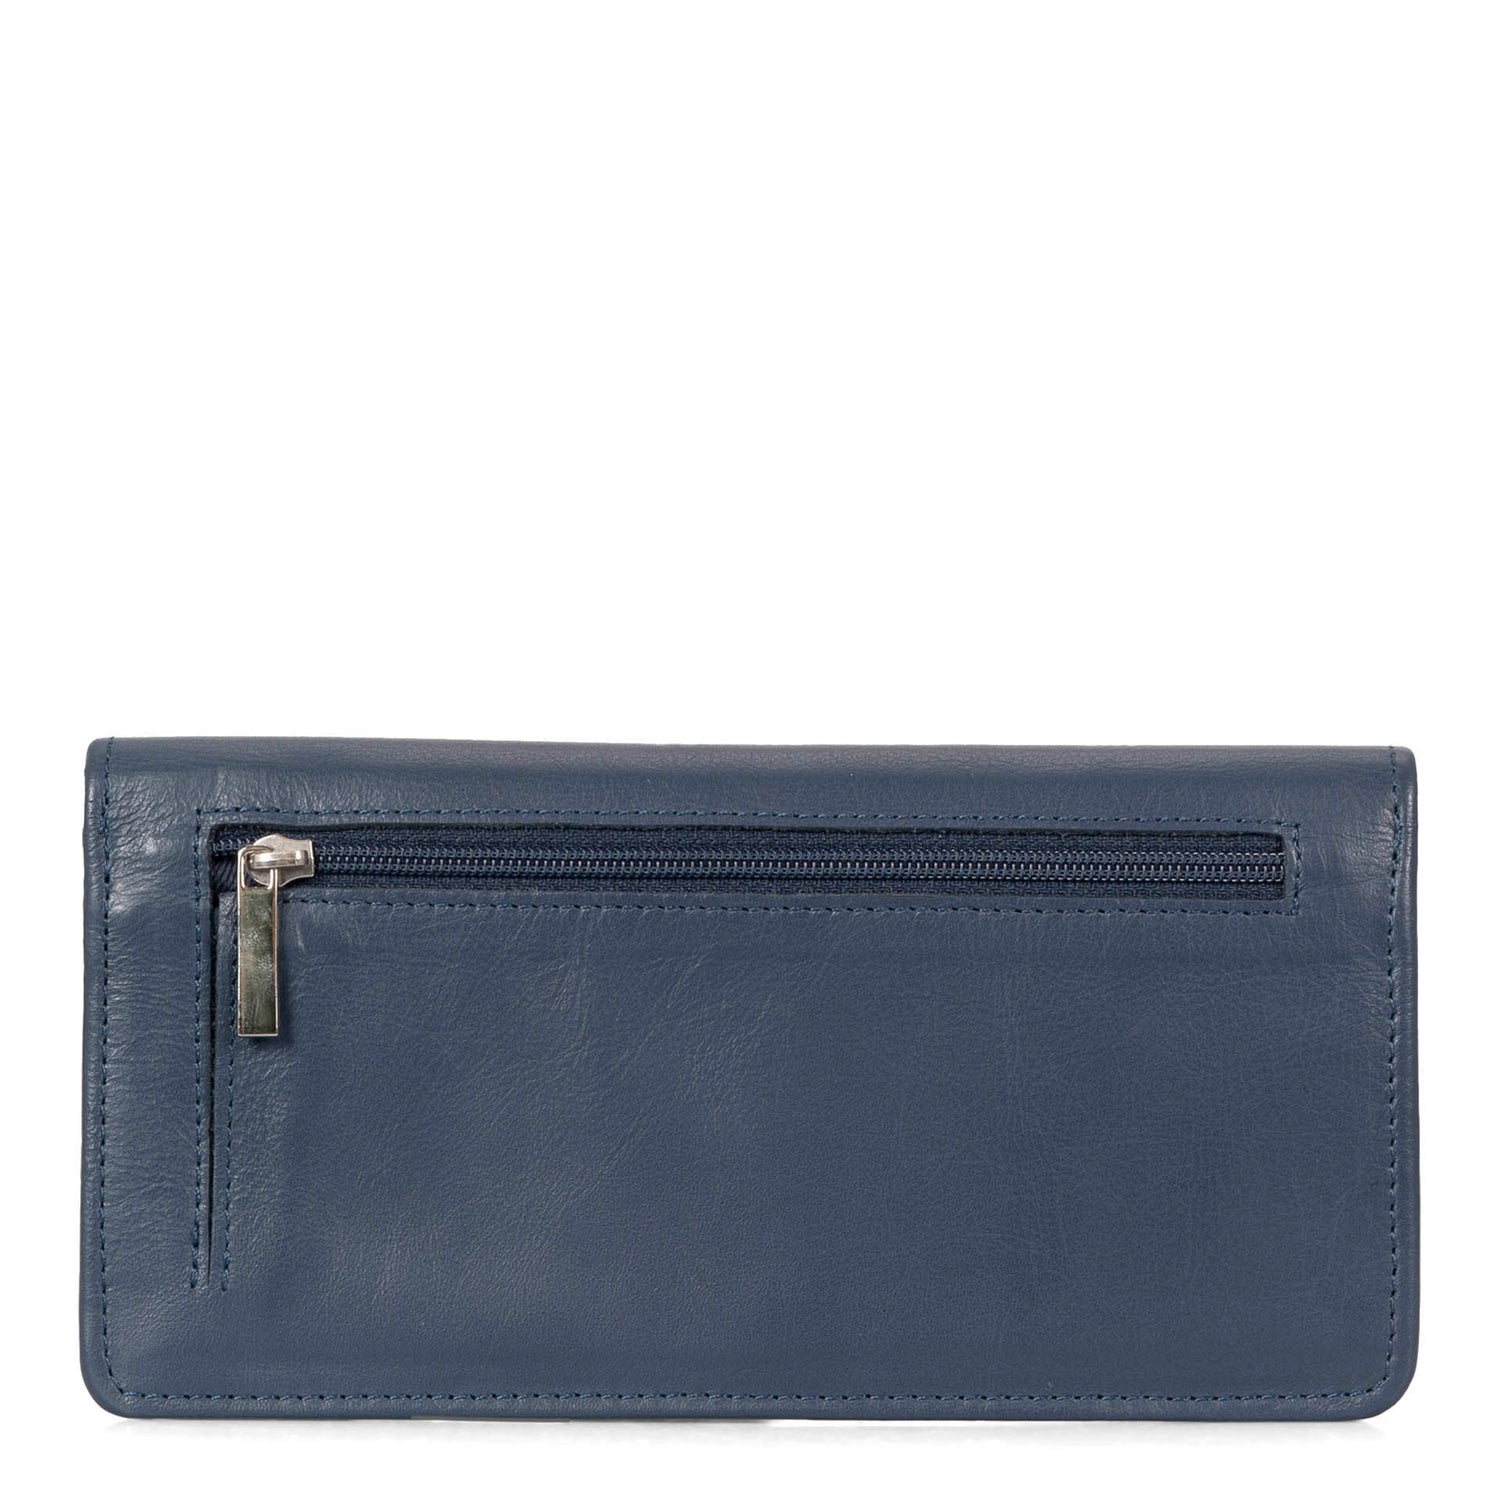 Back side of a blue women's wallet called Kelly designed by Tracker showing its hidden exterior compartment and smooth leather texture.